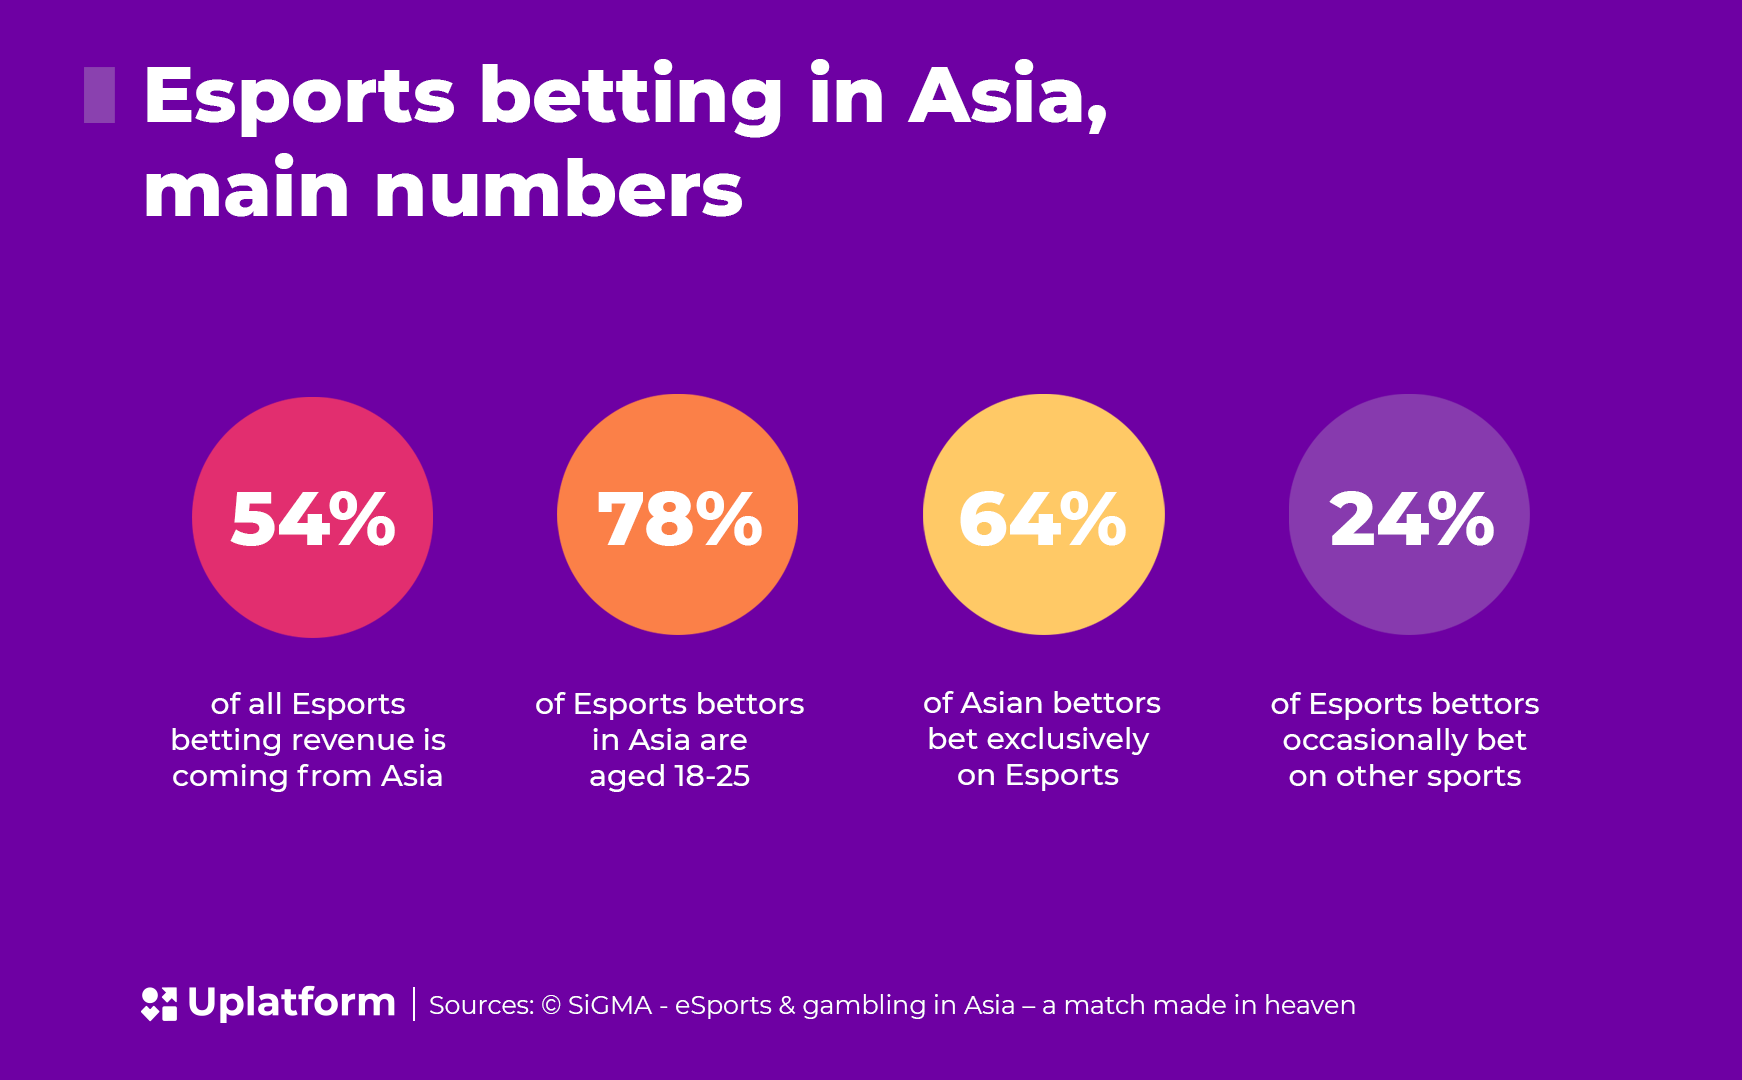 iGaming in Asia